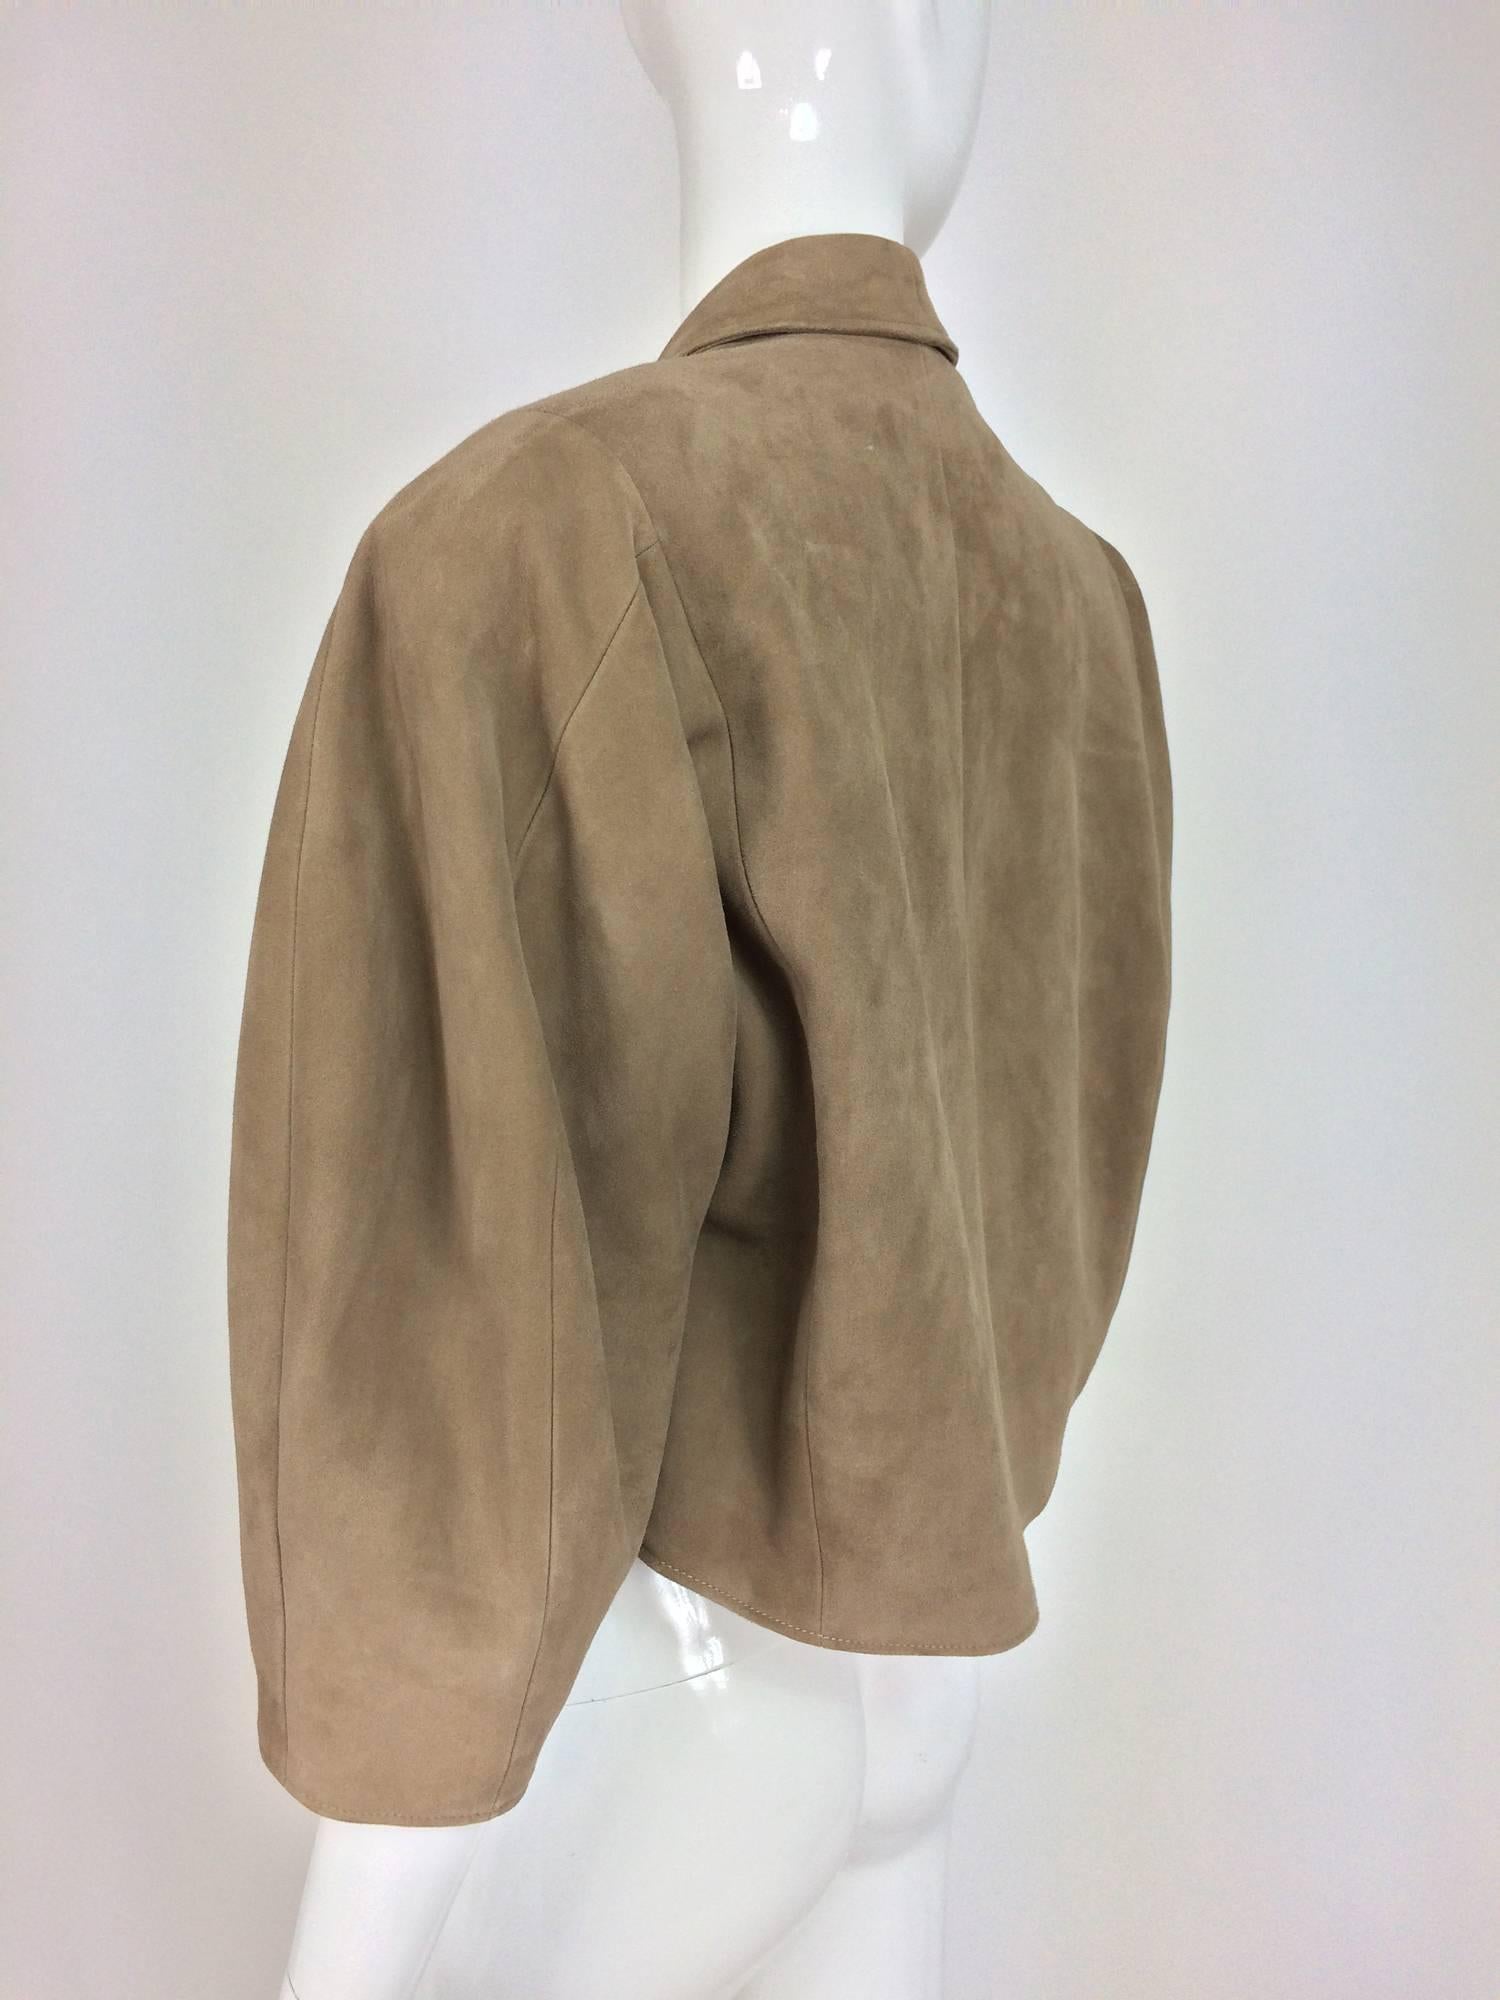 Women's Jean-Claude Jitrois taupe suede cropped swing jacket 1980s For Sale